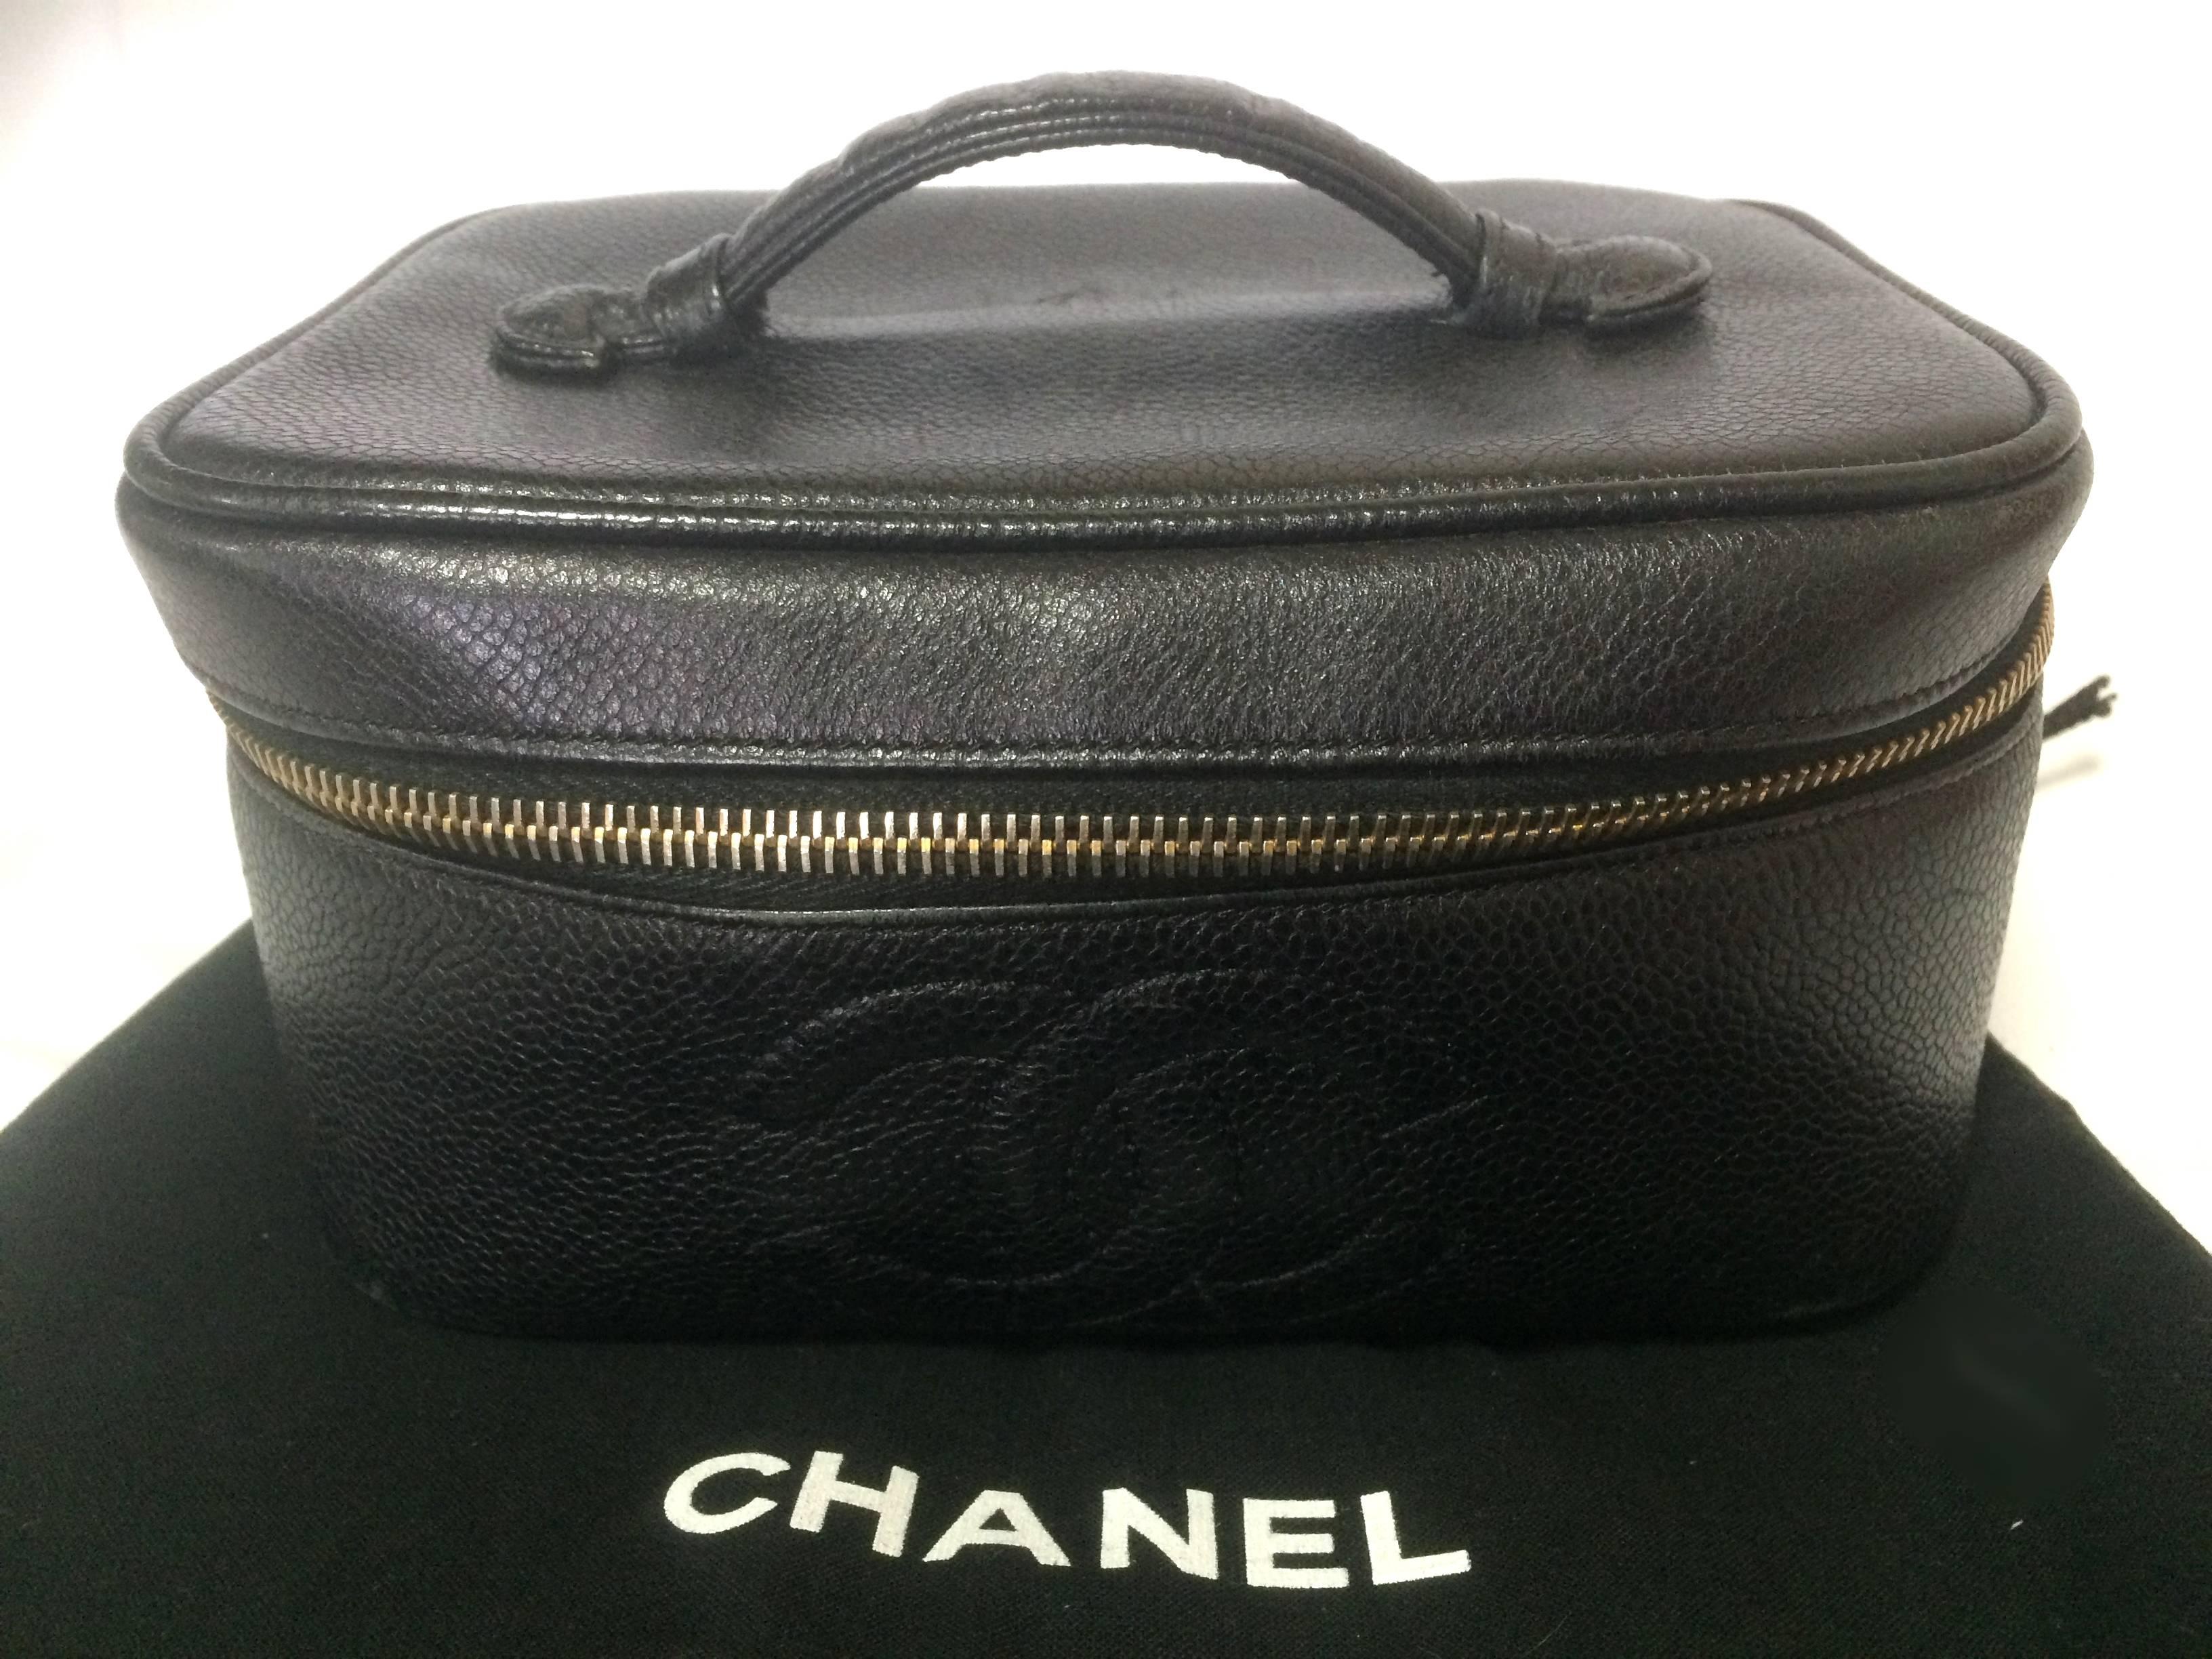 1990s. Vintage CHANEL caviarskin cosmetic, makeup and toiletry black purse. Very chic vanity purse from Chanel back in the era.

This is a 90's vintage CHANEL cosmetic purse made out of caviarskin.
Classic color in black.
Featuring an embossed